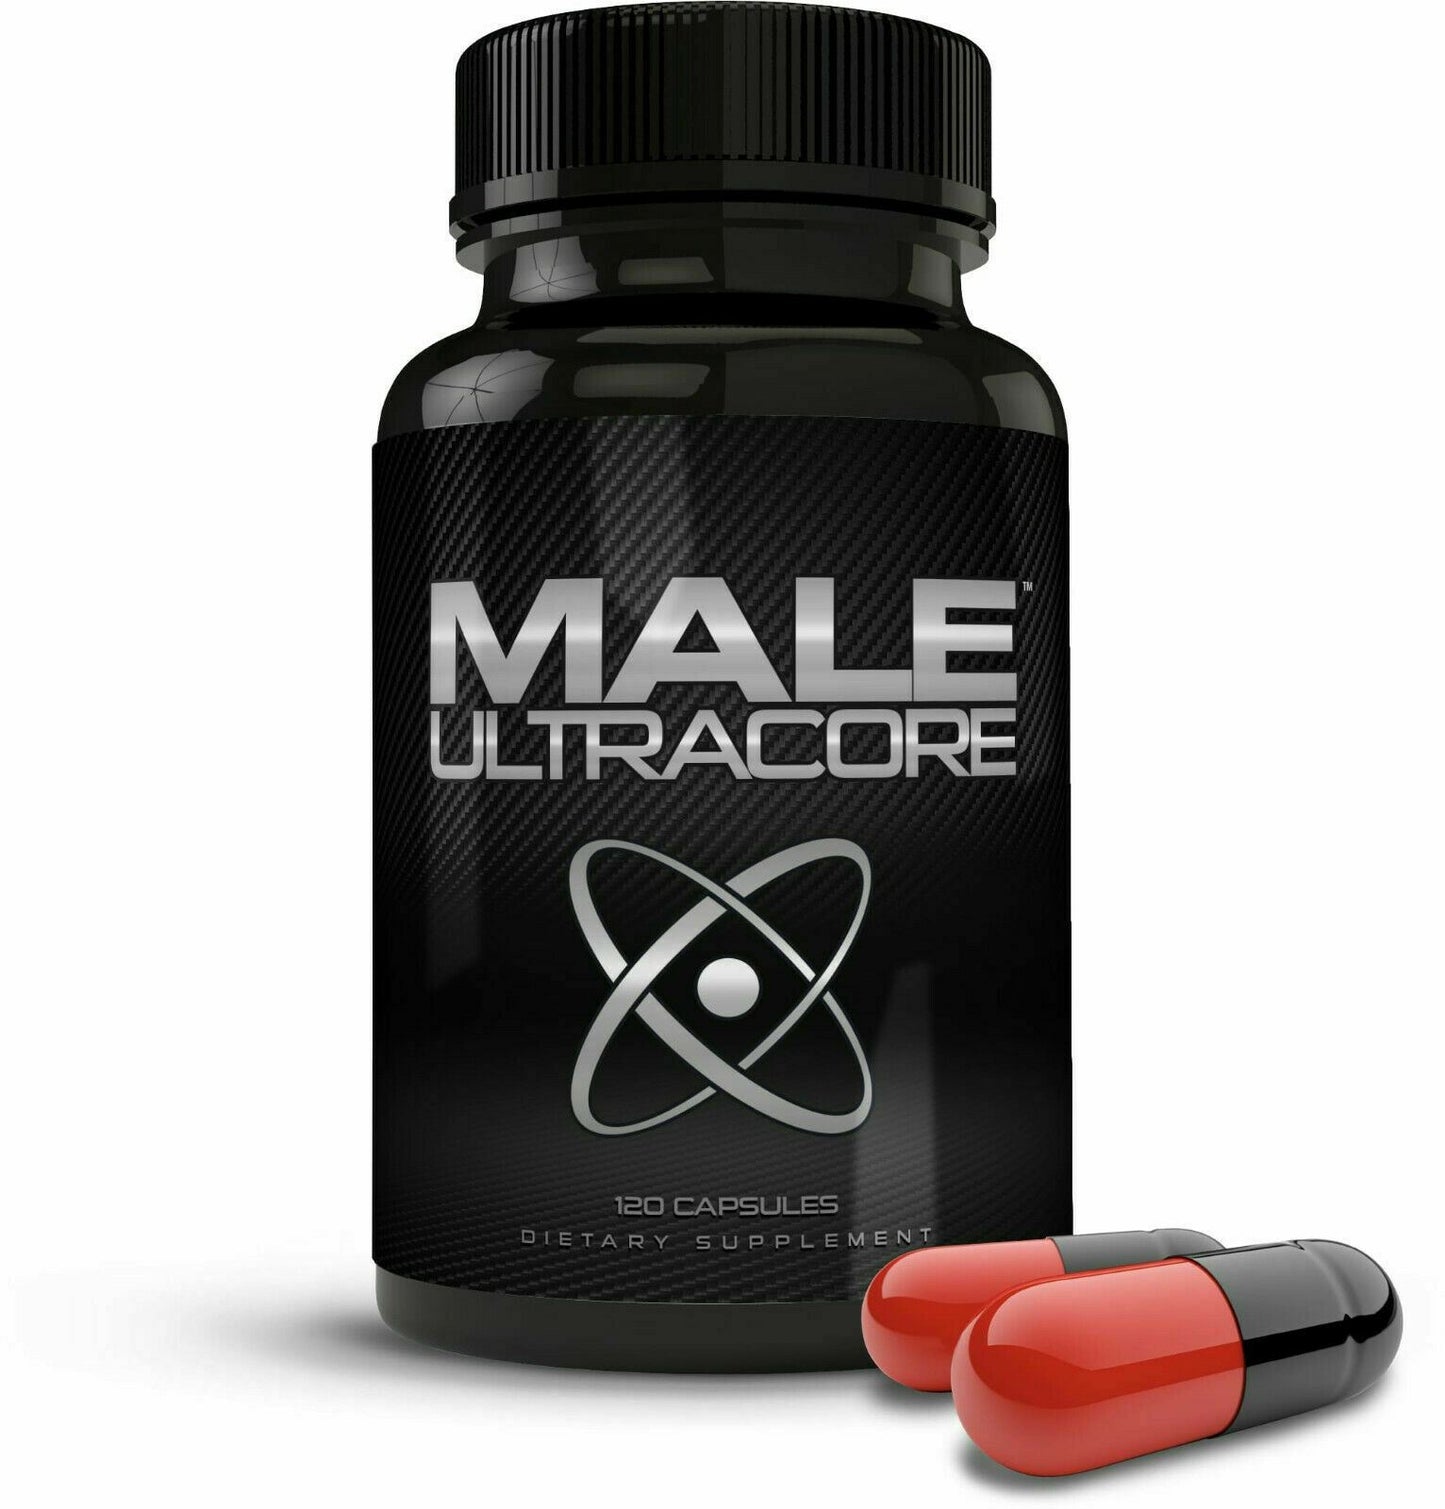 Male Ultracore - Testosterone Booster & Performance Enhancing Supplement